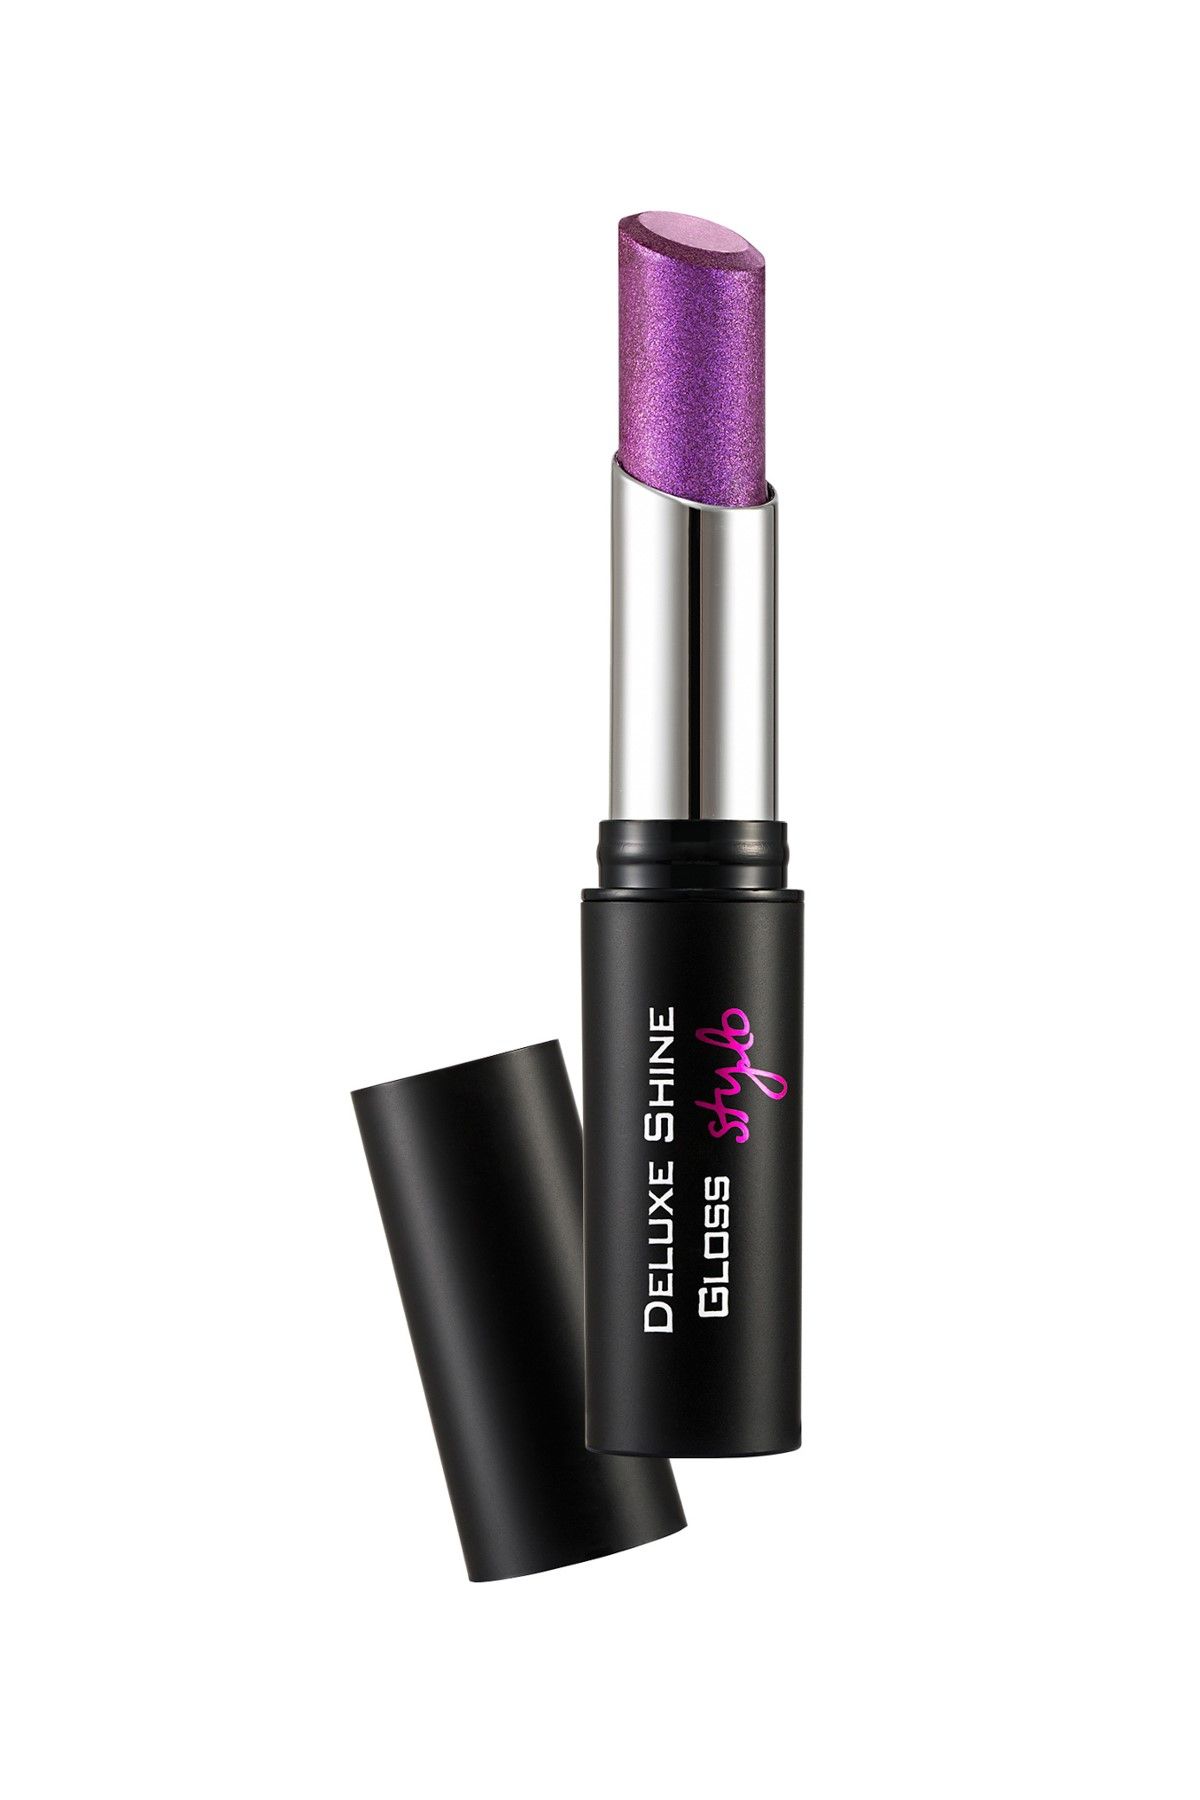 Flormar Ruj - Deluxe Shine gloss Stylo Violet Space 8690604209521